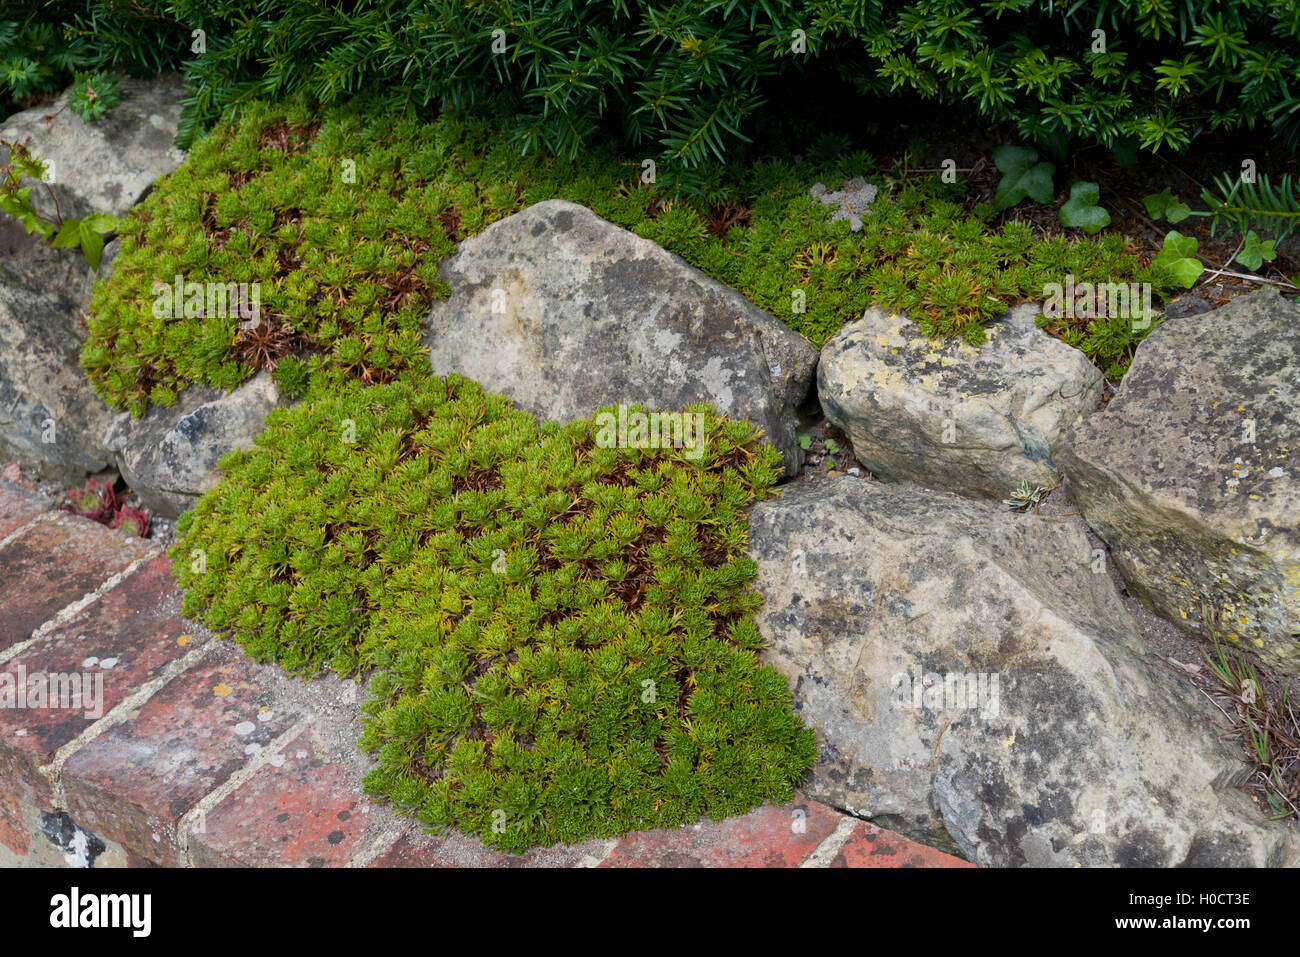 Ground cover plant growing between rocks and bricks. Stock Photo